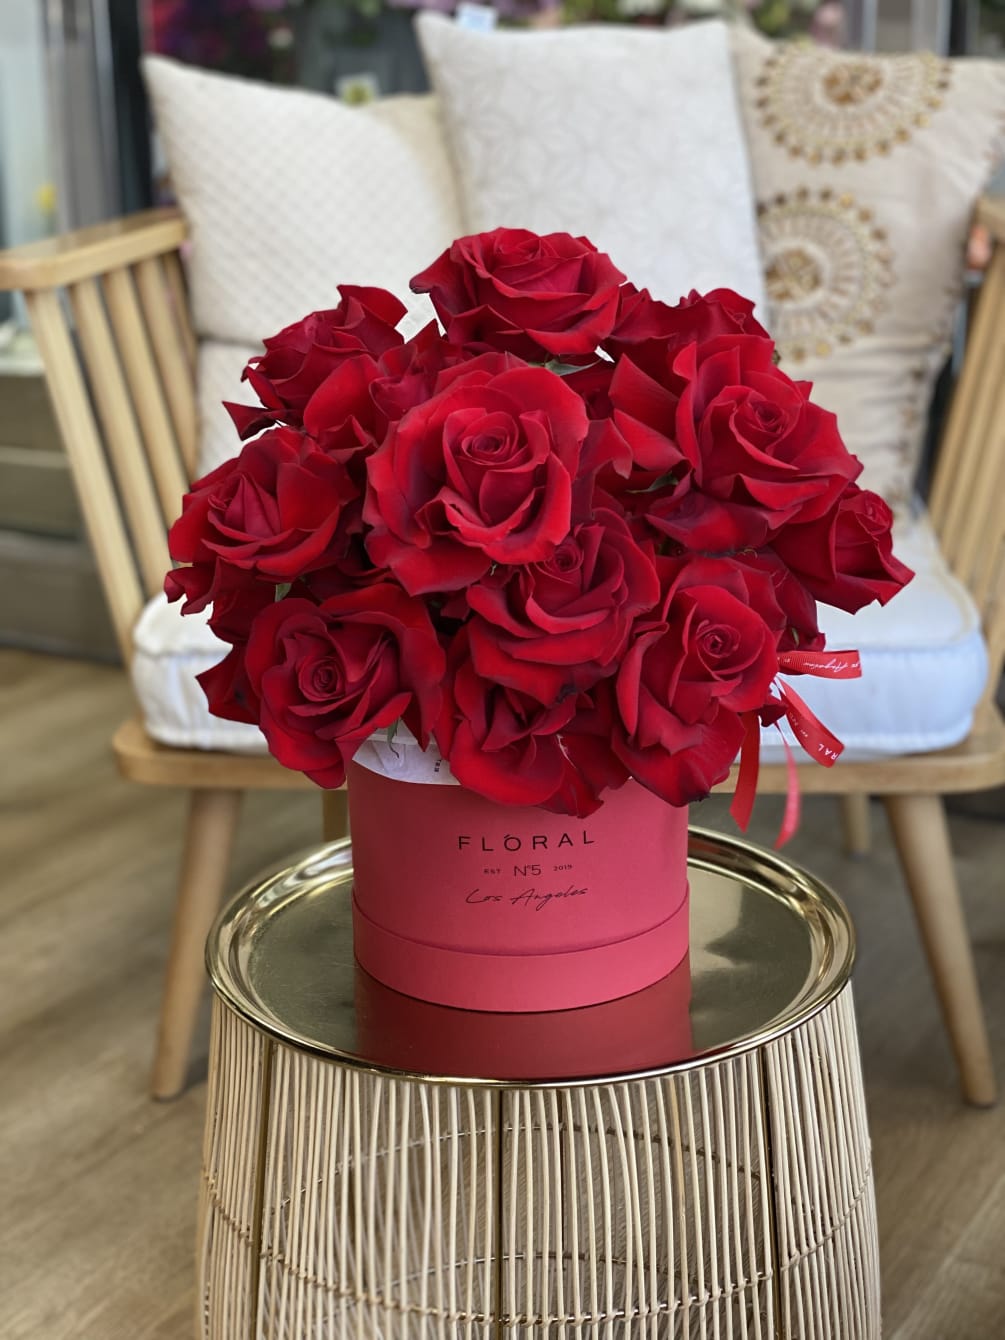 Tender red roses in our signature box

Available in 3 size options: 

Standard